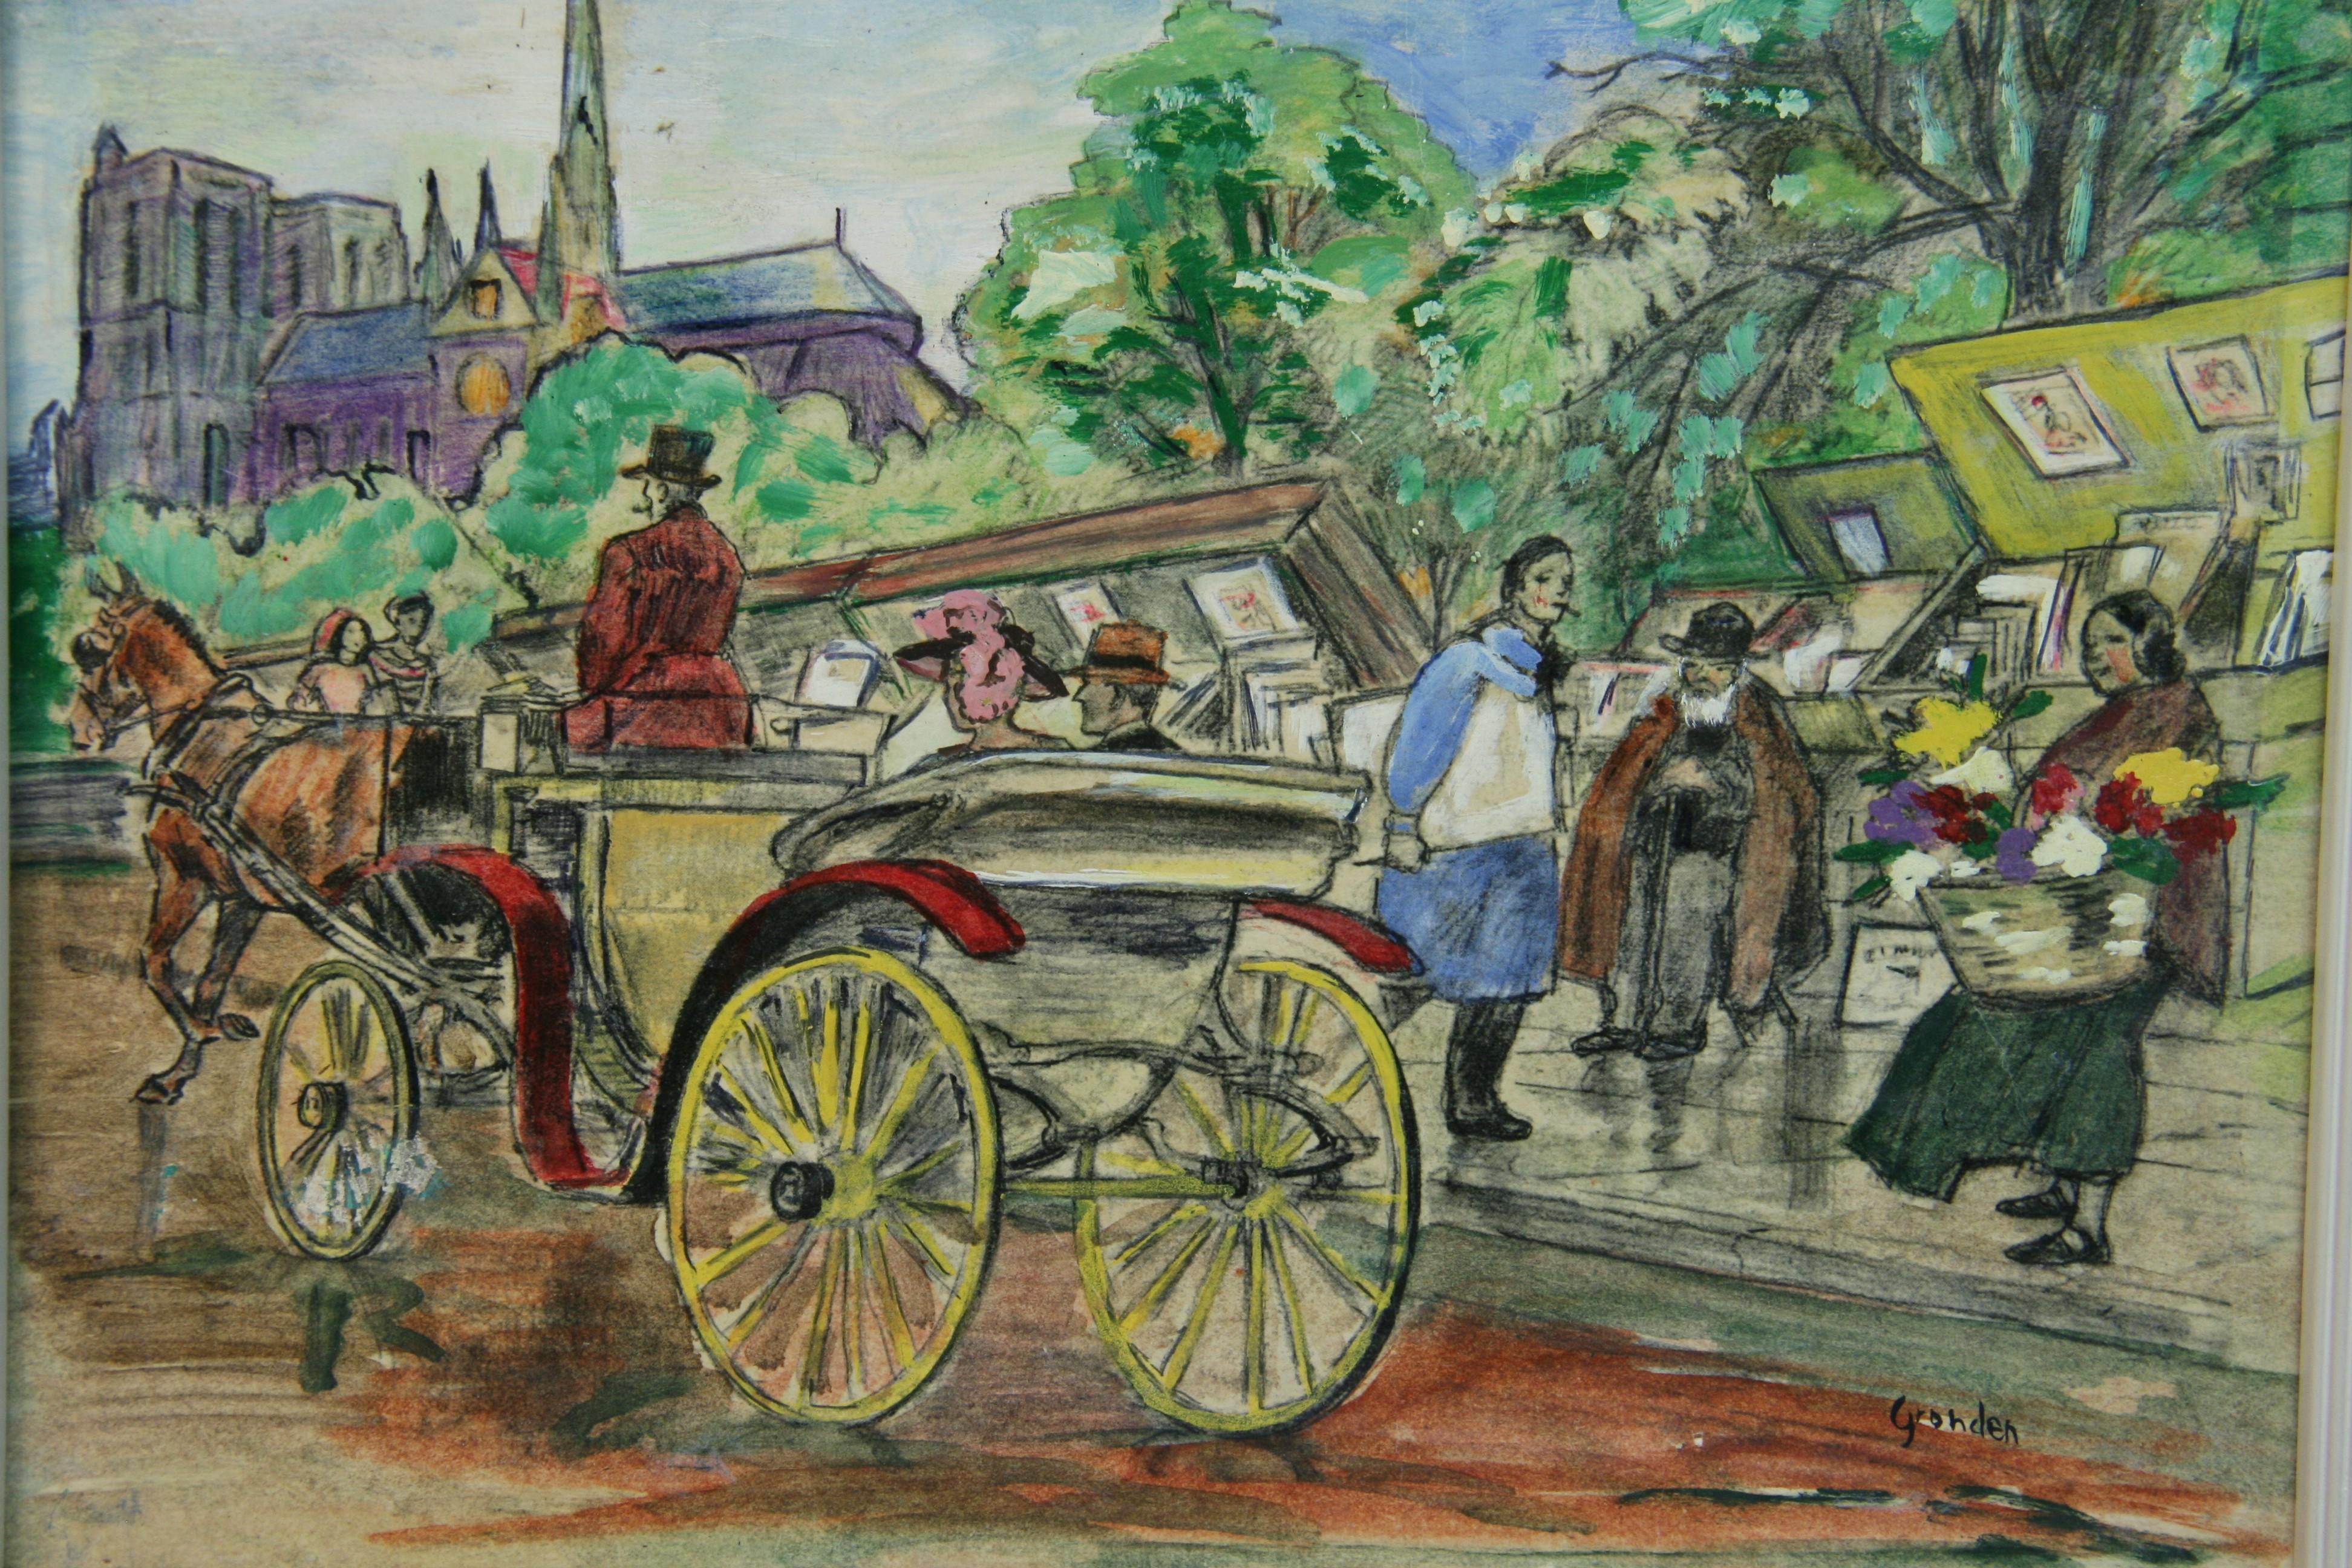 5204 French oil pastel carrige ride
Signed Grohden
Image size 9.5x 12.5